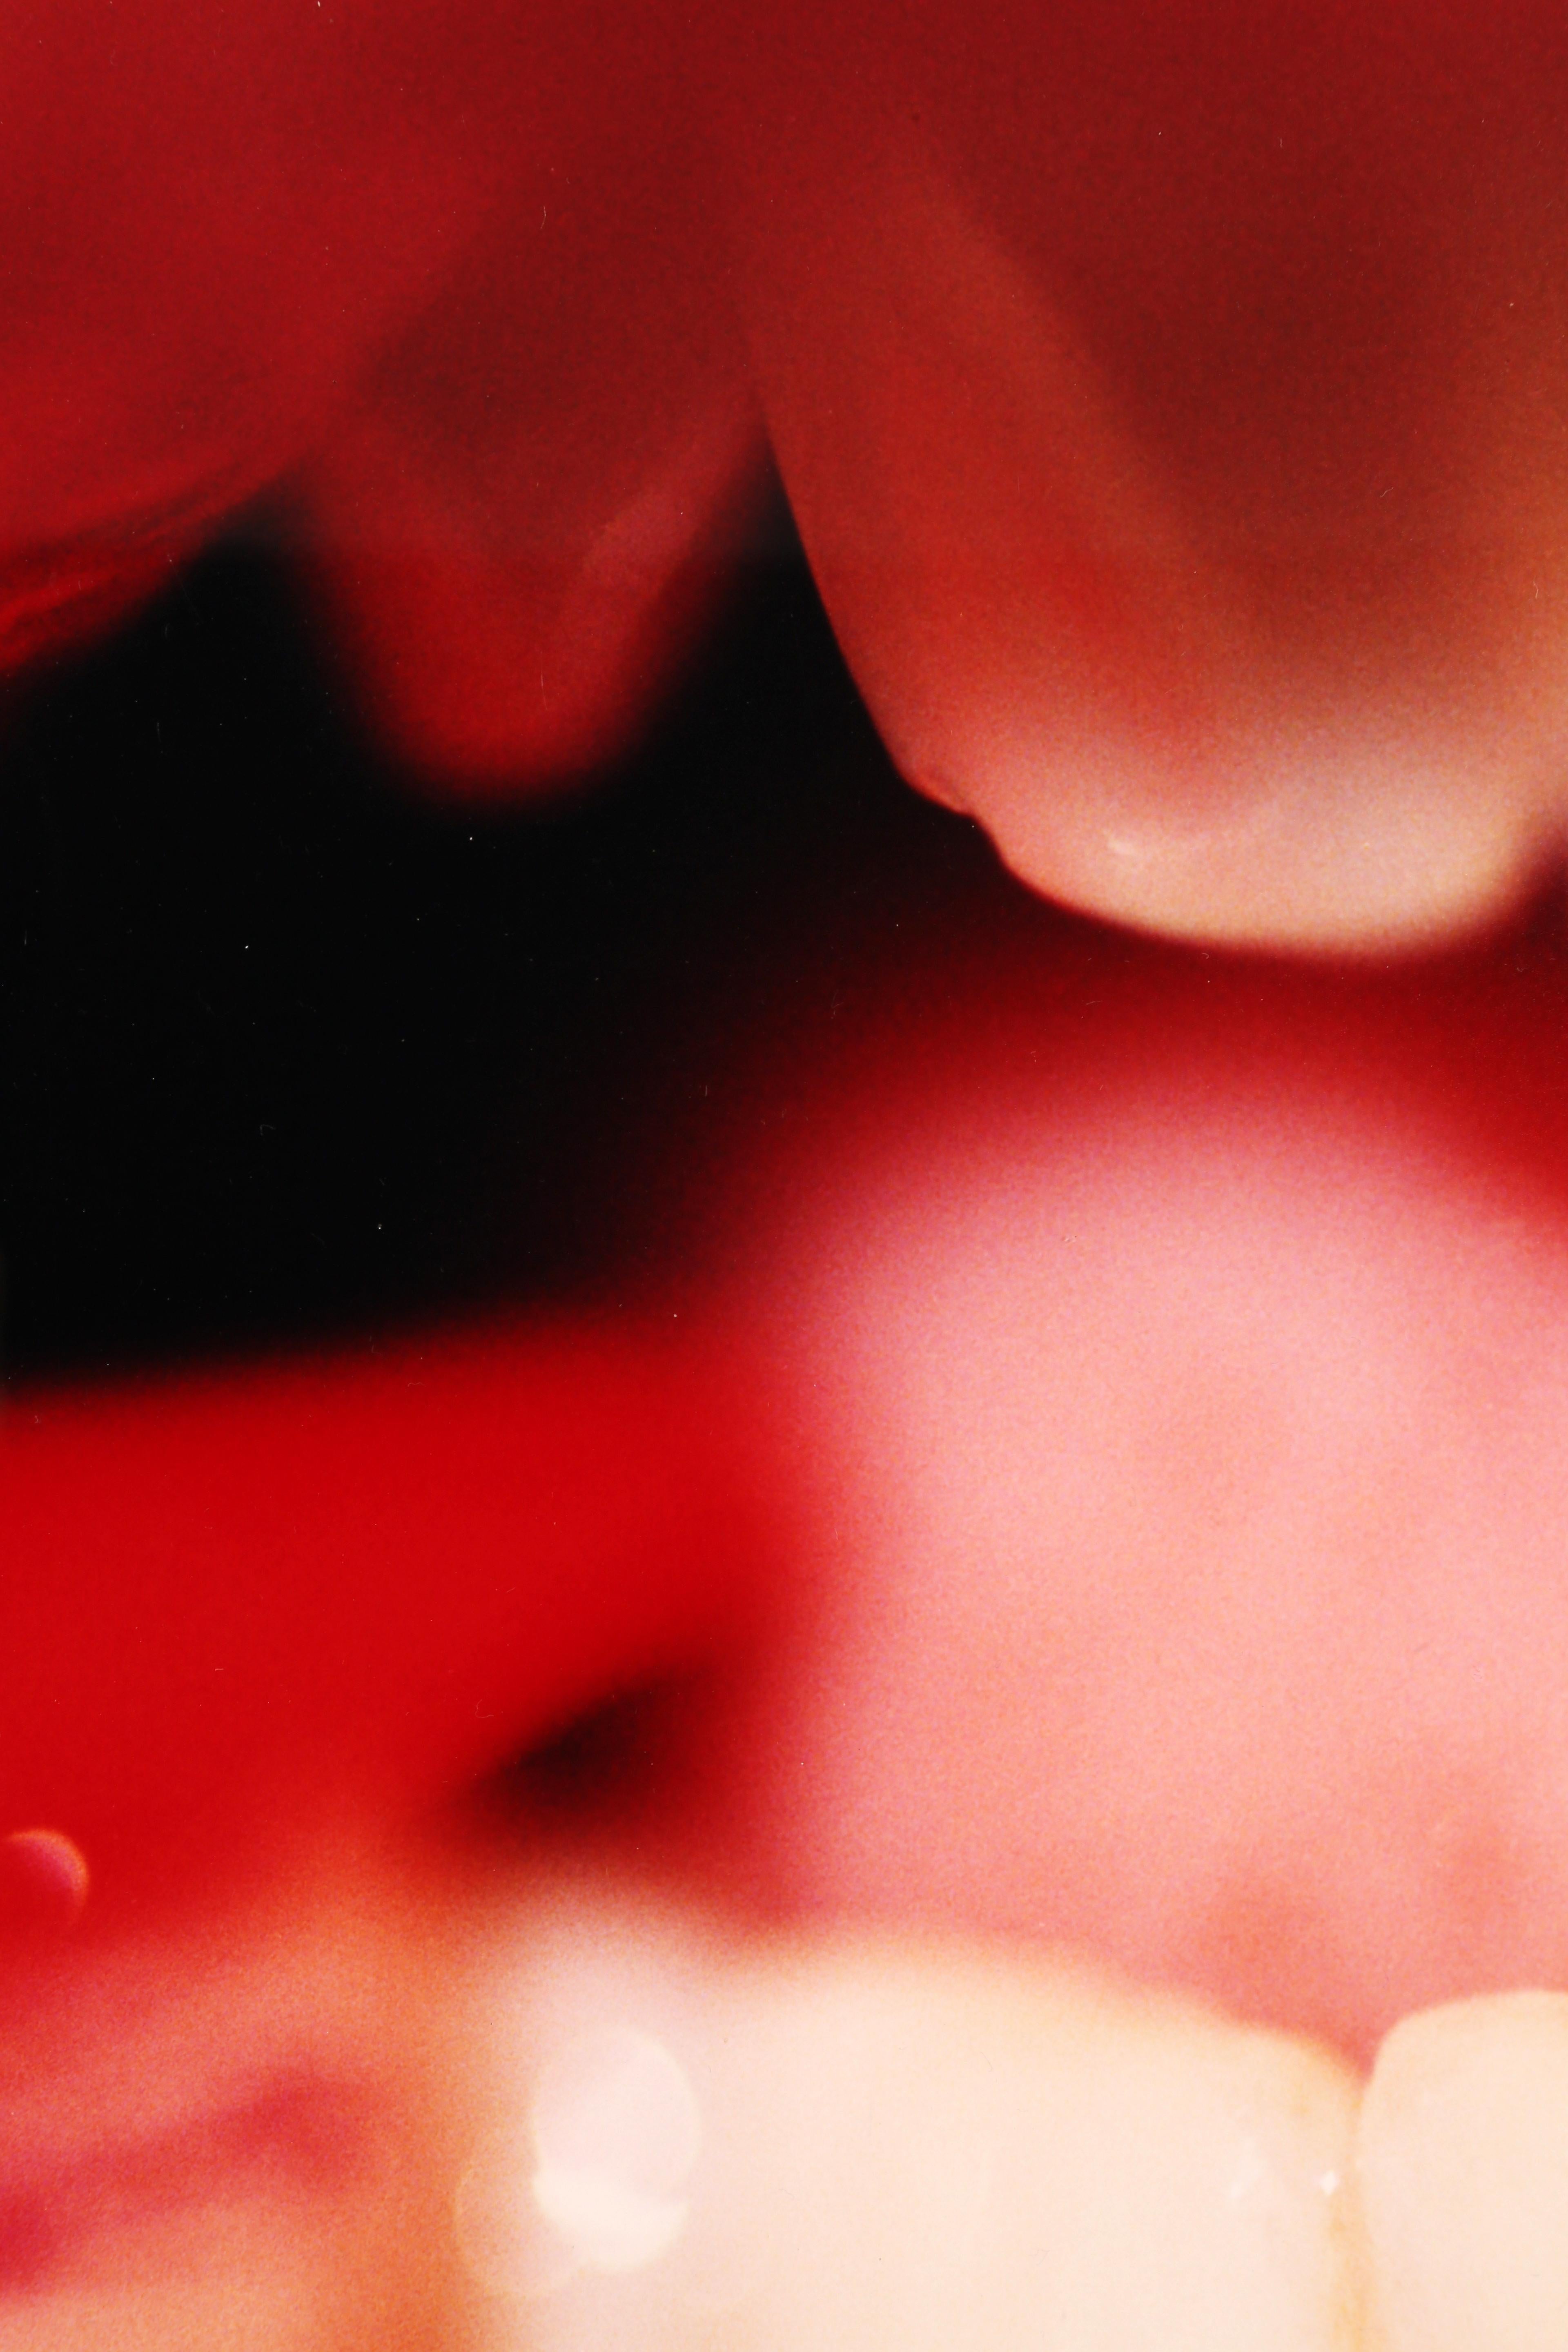 Marilyn Minter
Nail Biter, 2010
Color photograph
20 x 24 inches  (50.8 x 61 cm)
Edition 12/20